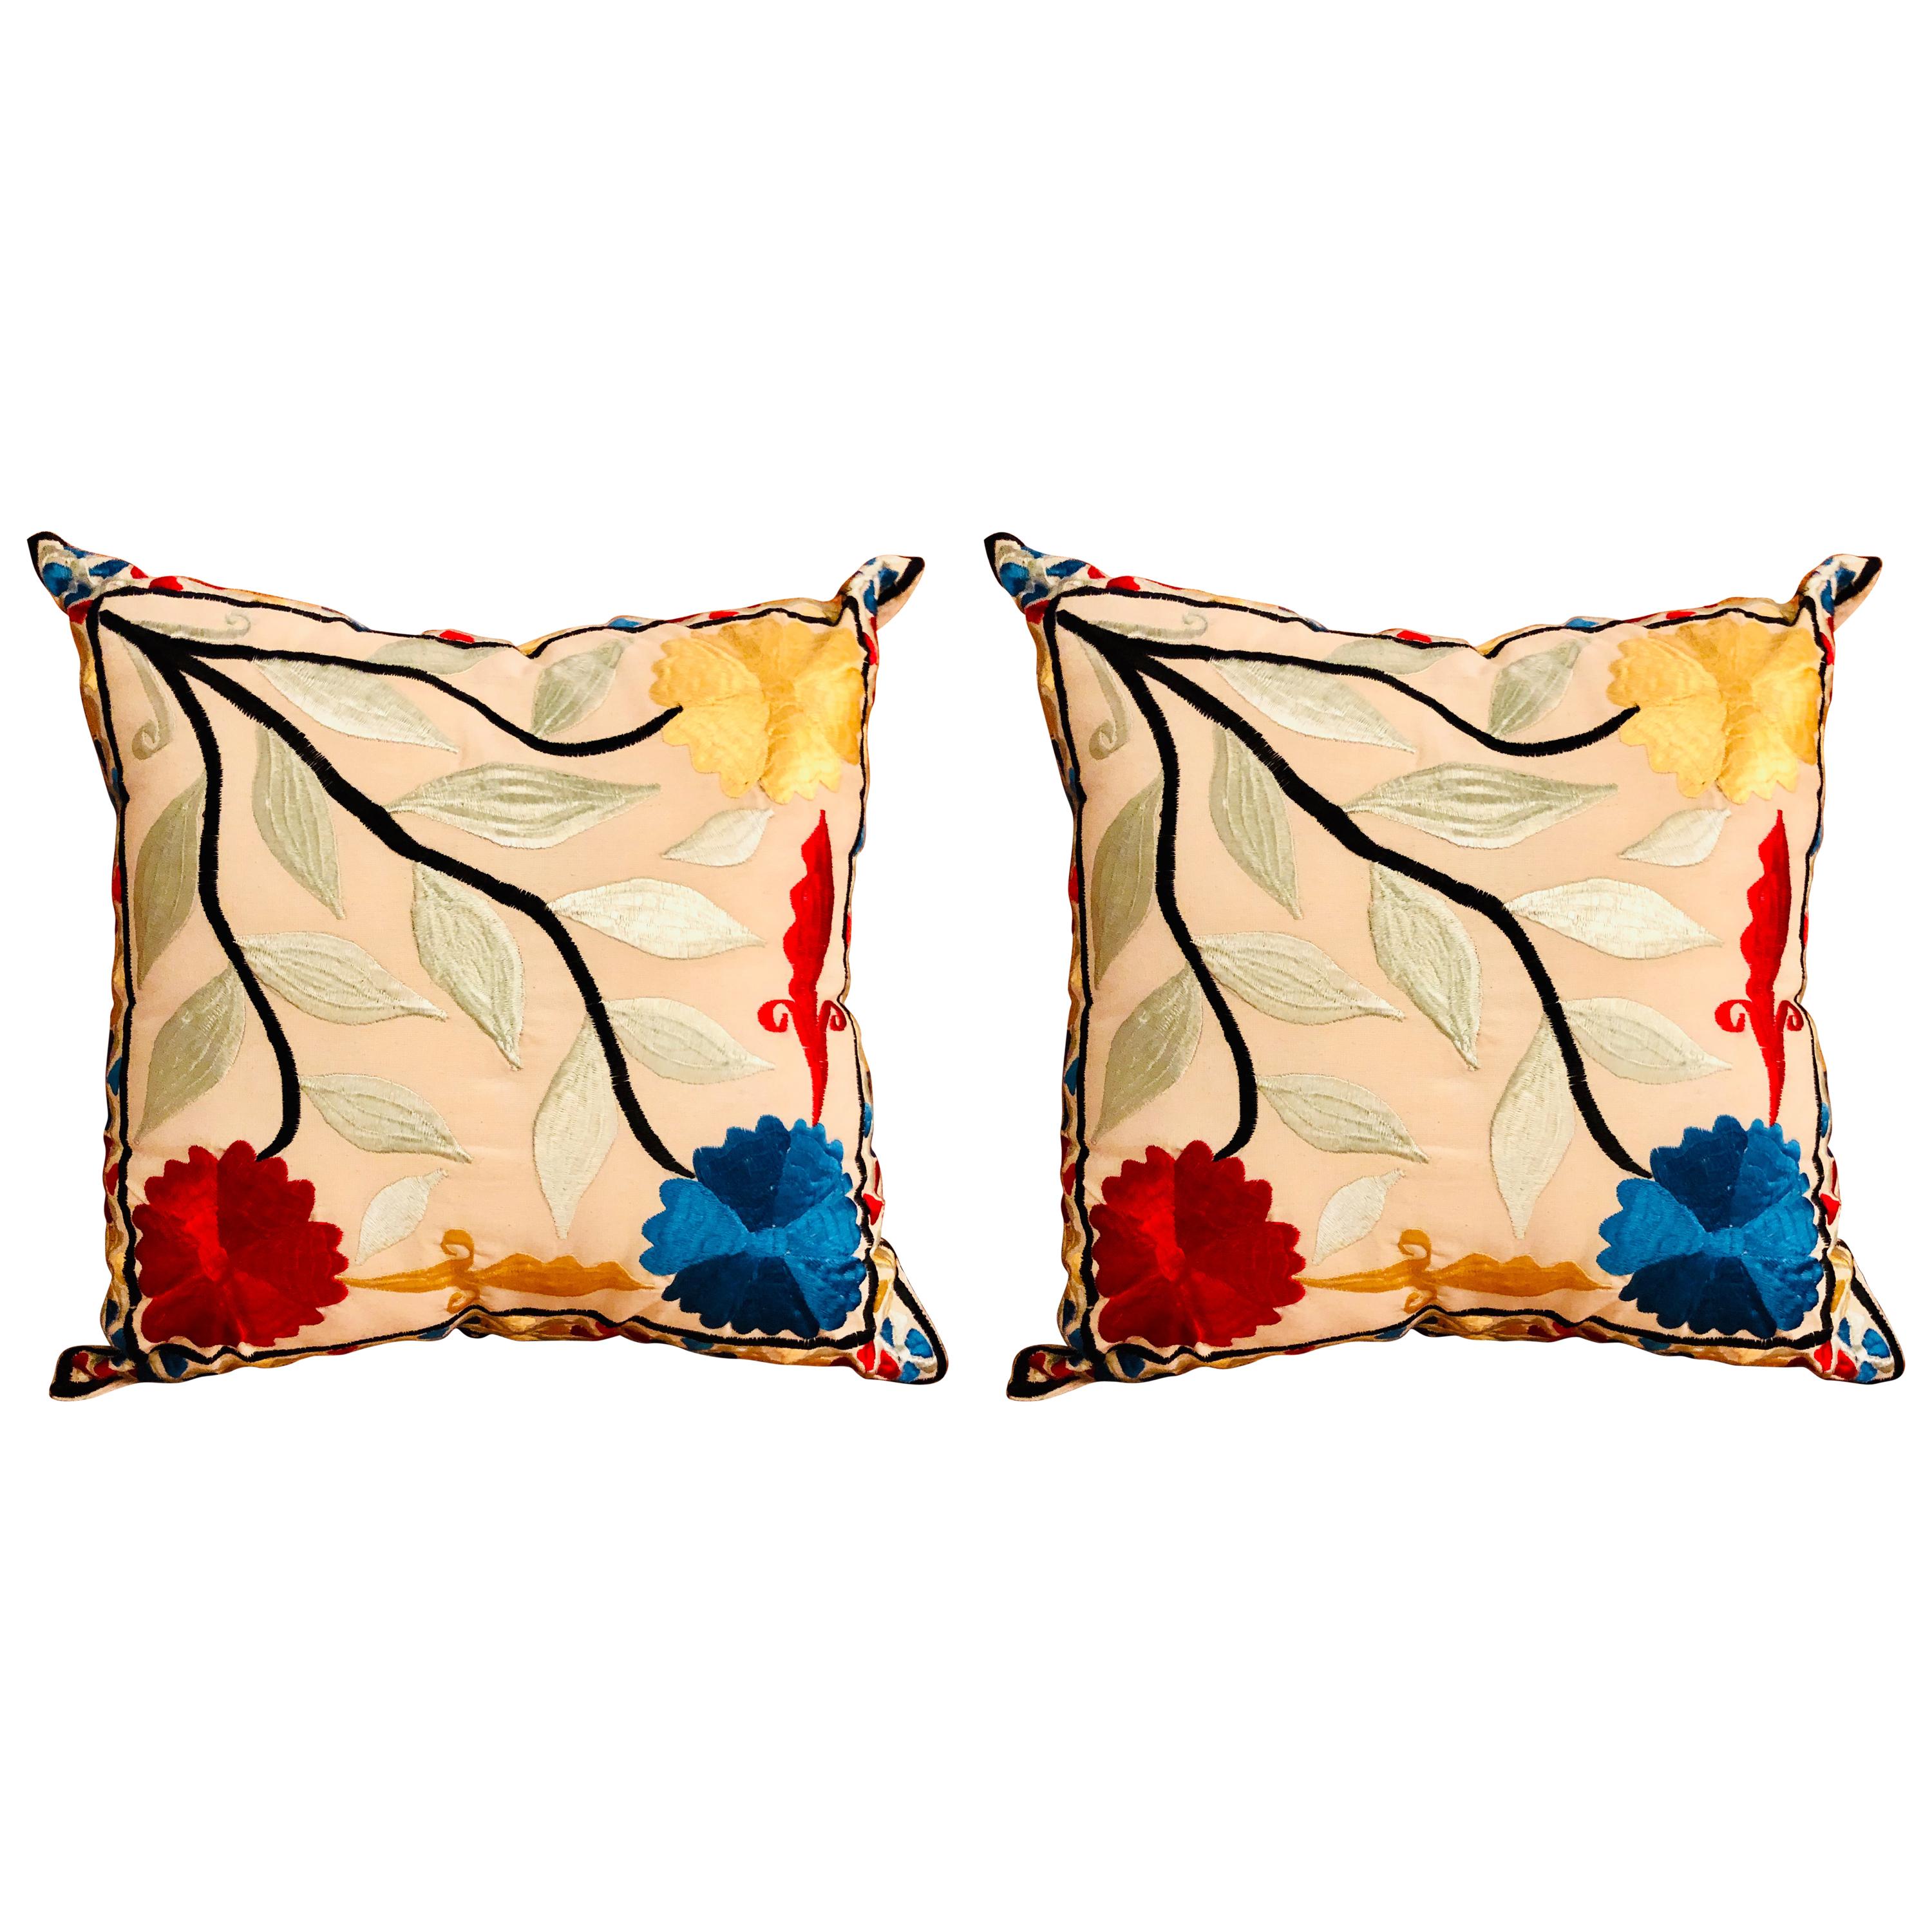 Pair of Moroccan Handmade Embroidered Pillows